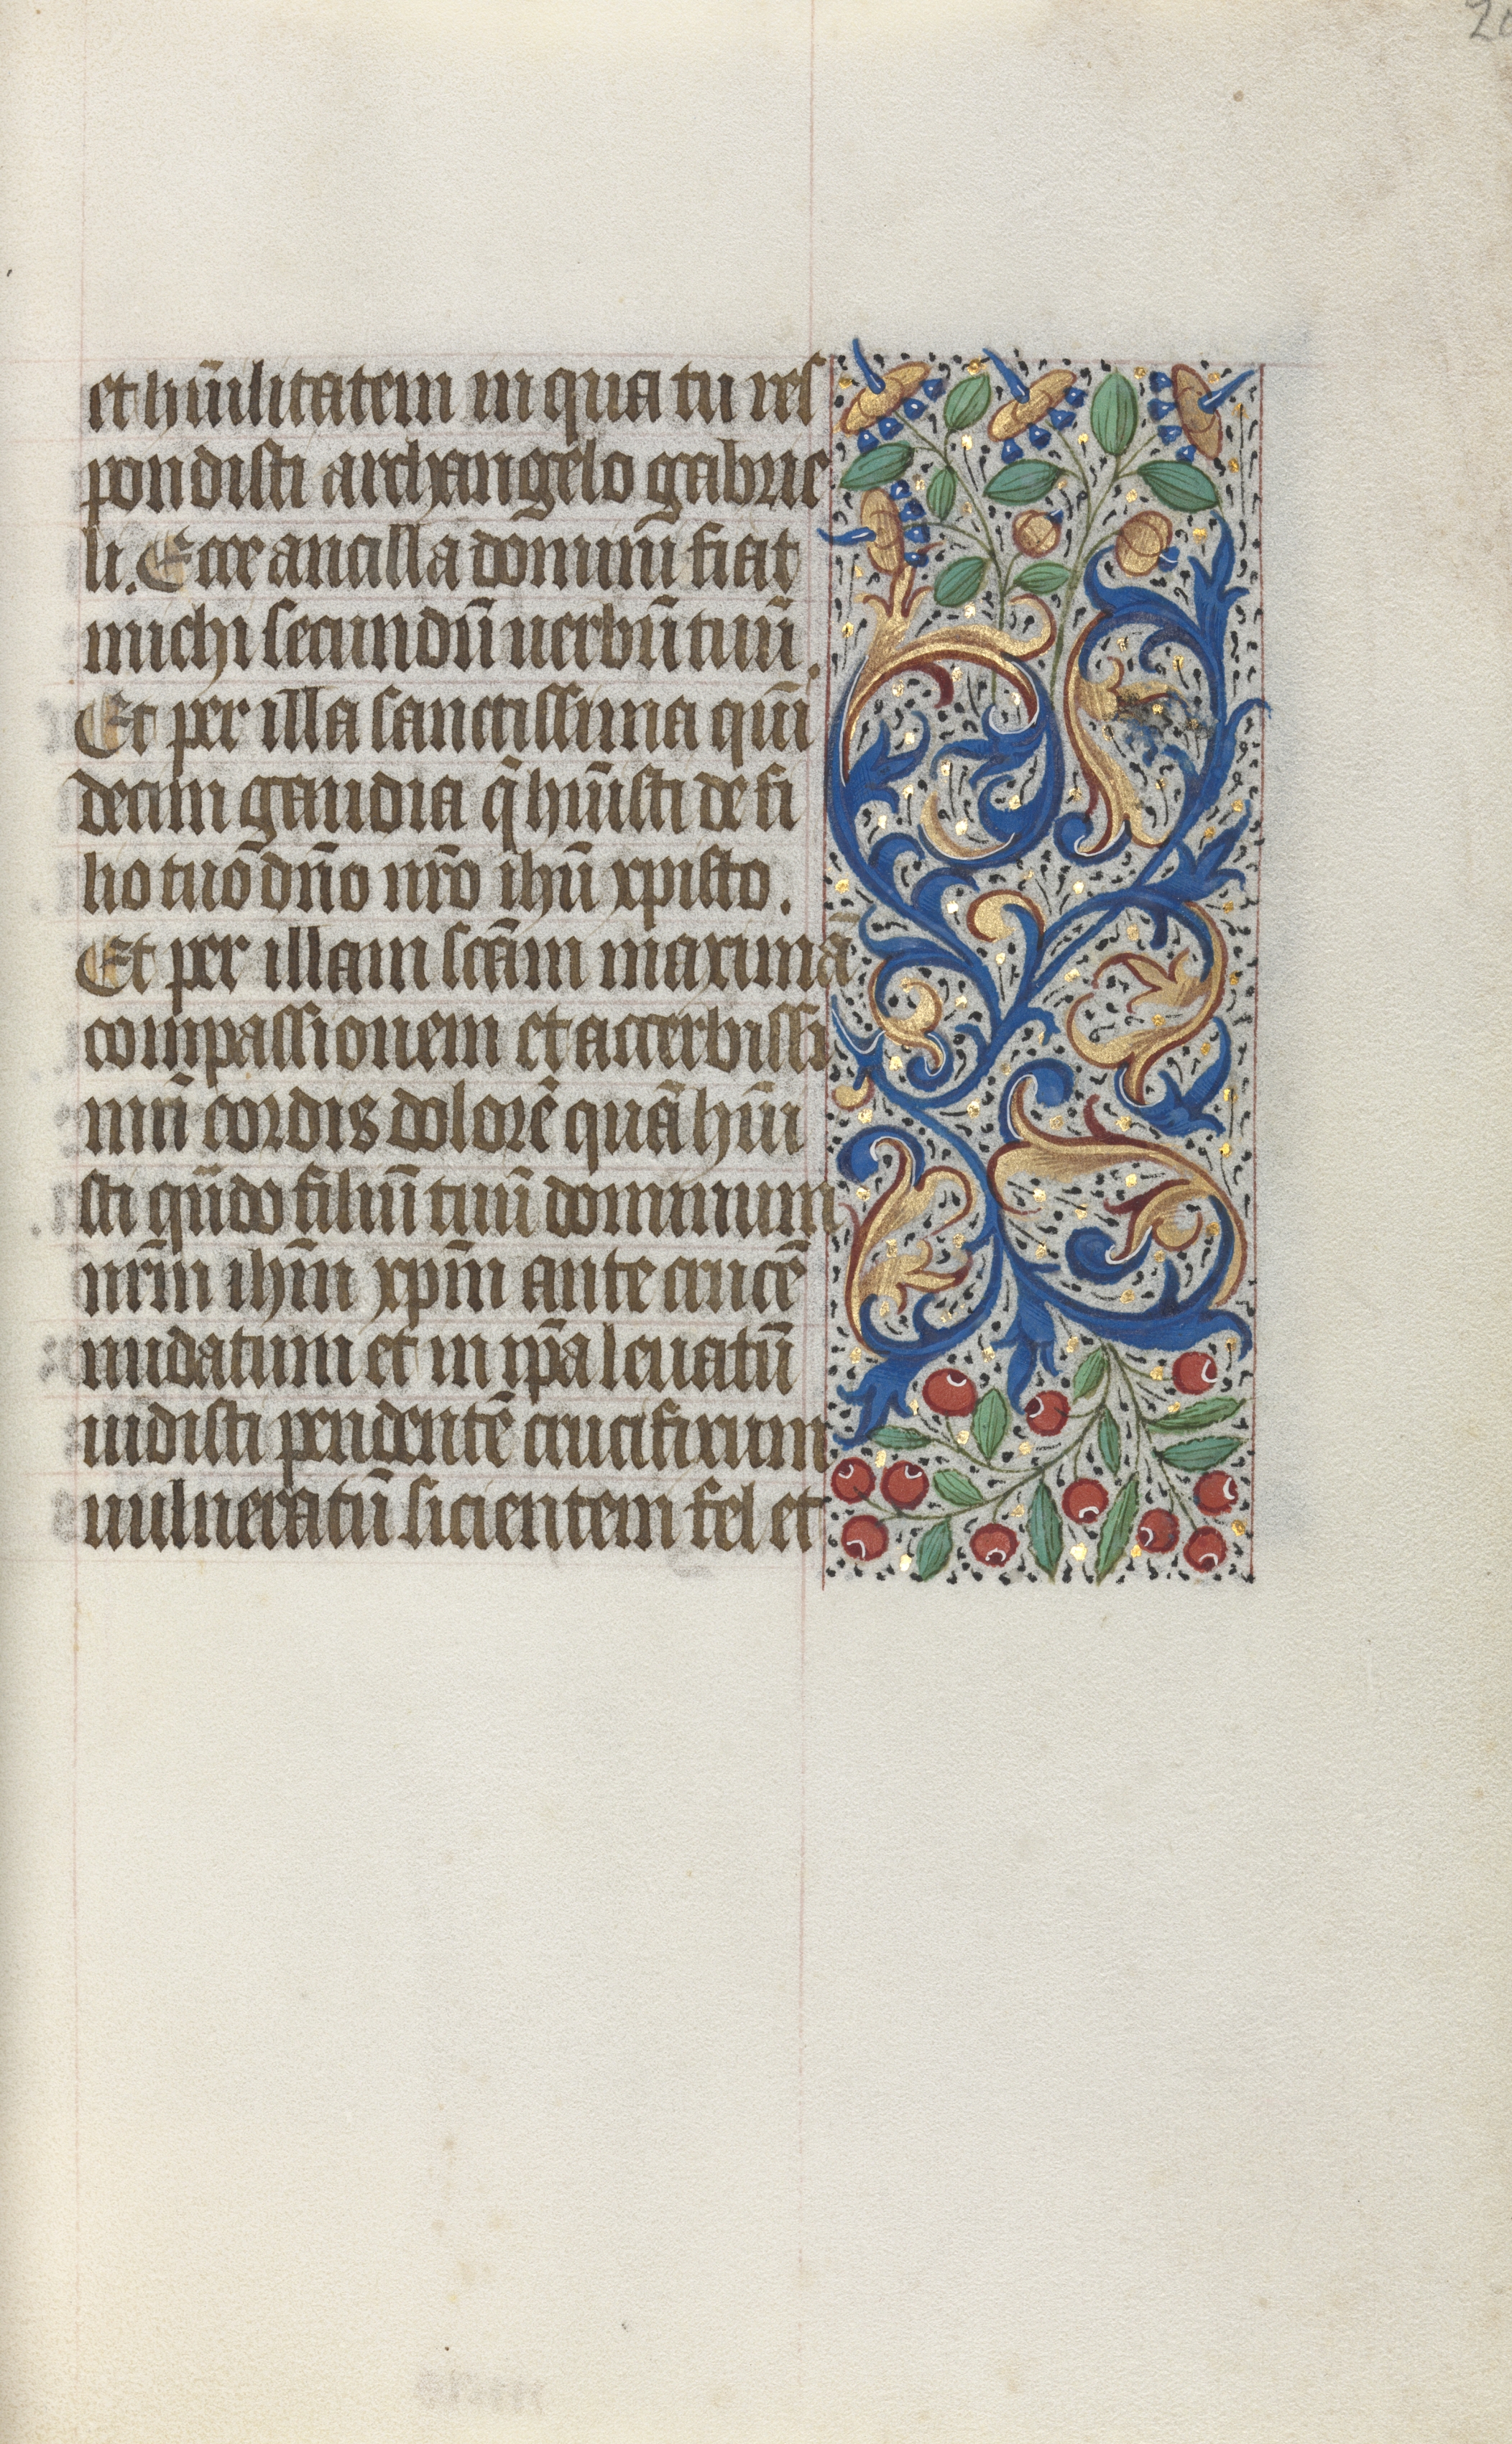 Book of Hours (Use of Rouen): fol. 20r